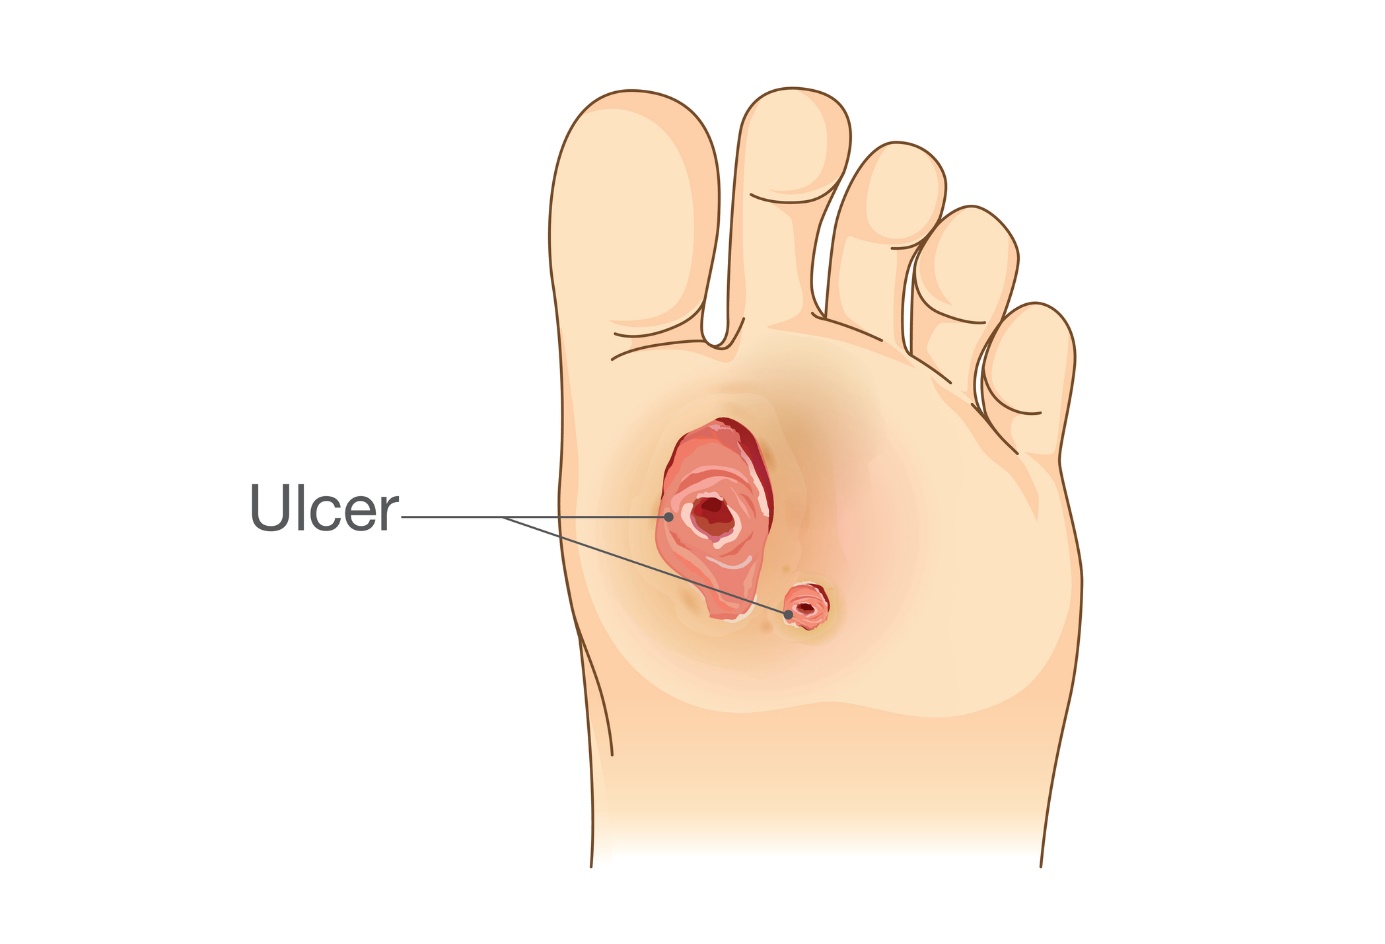 Ulcer on the foot